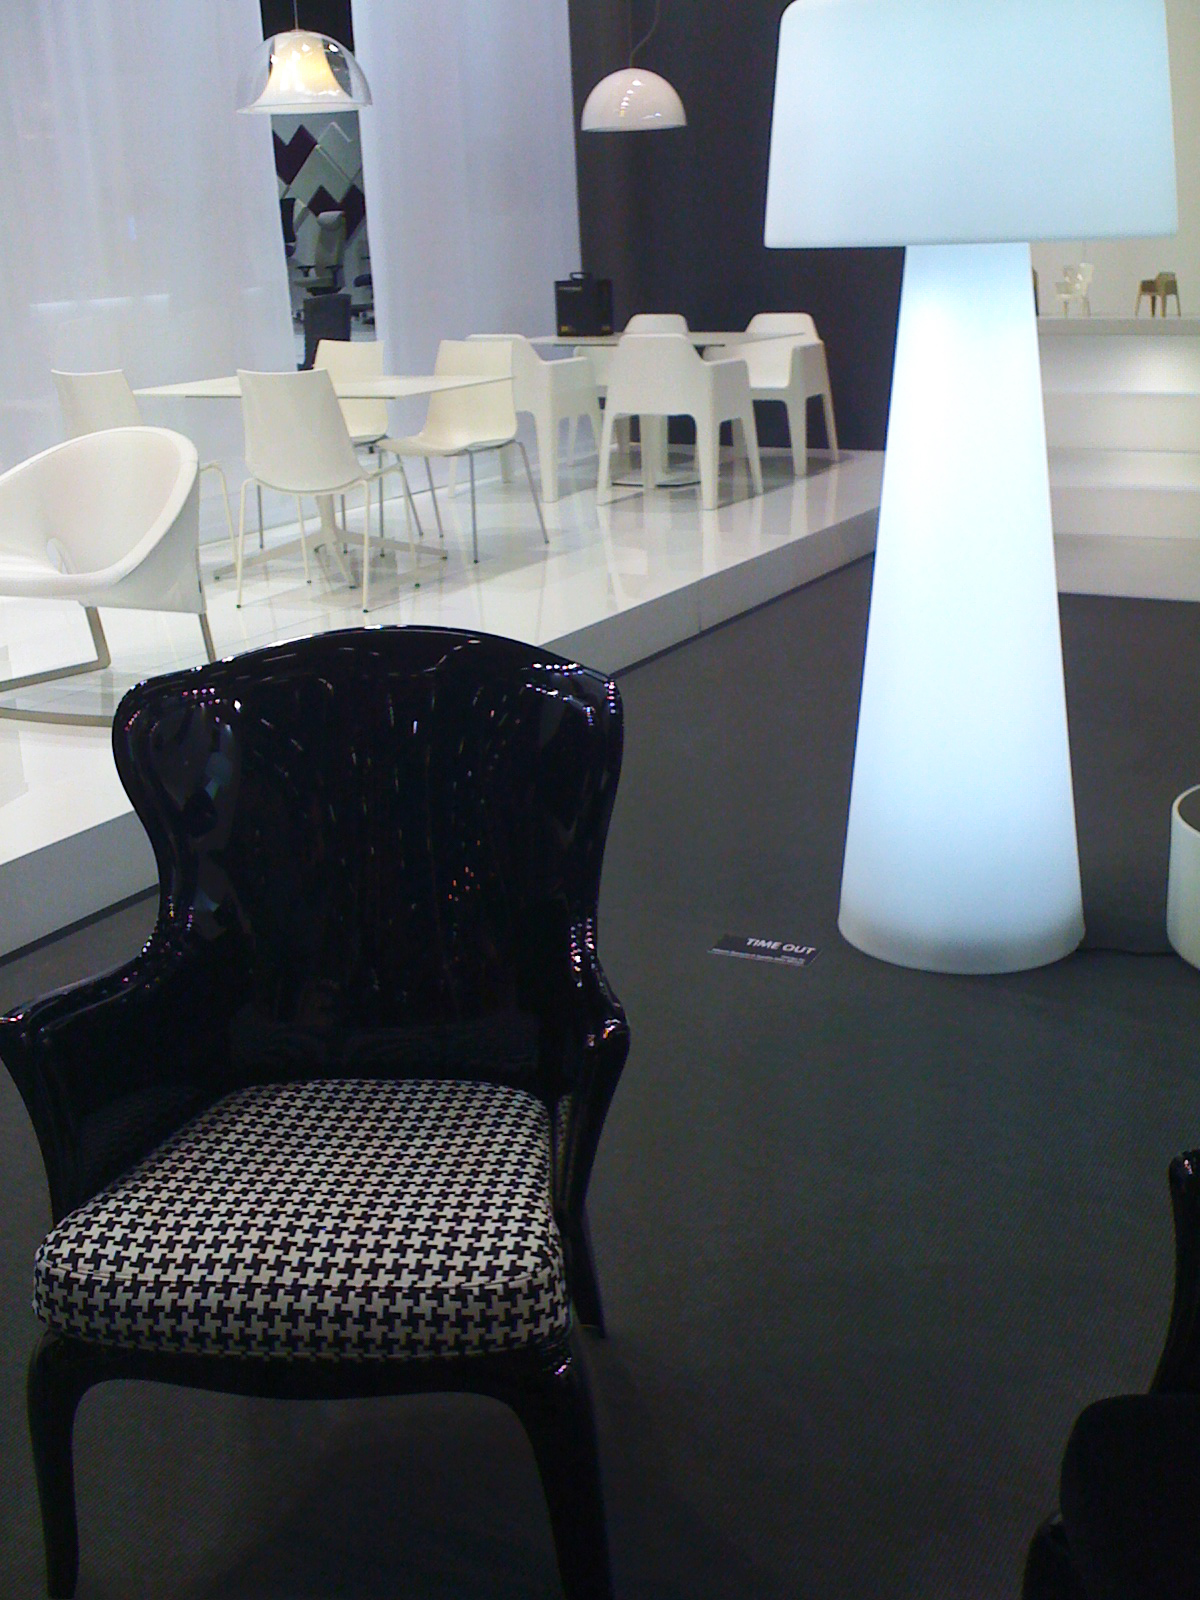 Gorgeous chair and the giant lamp "Time Out" from Pedrali